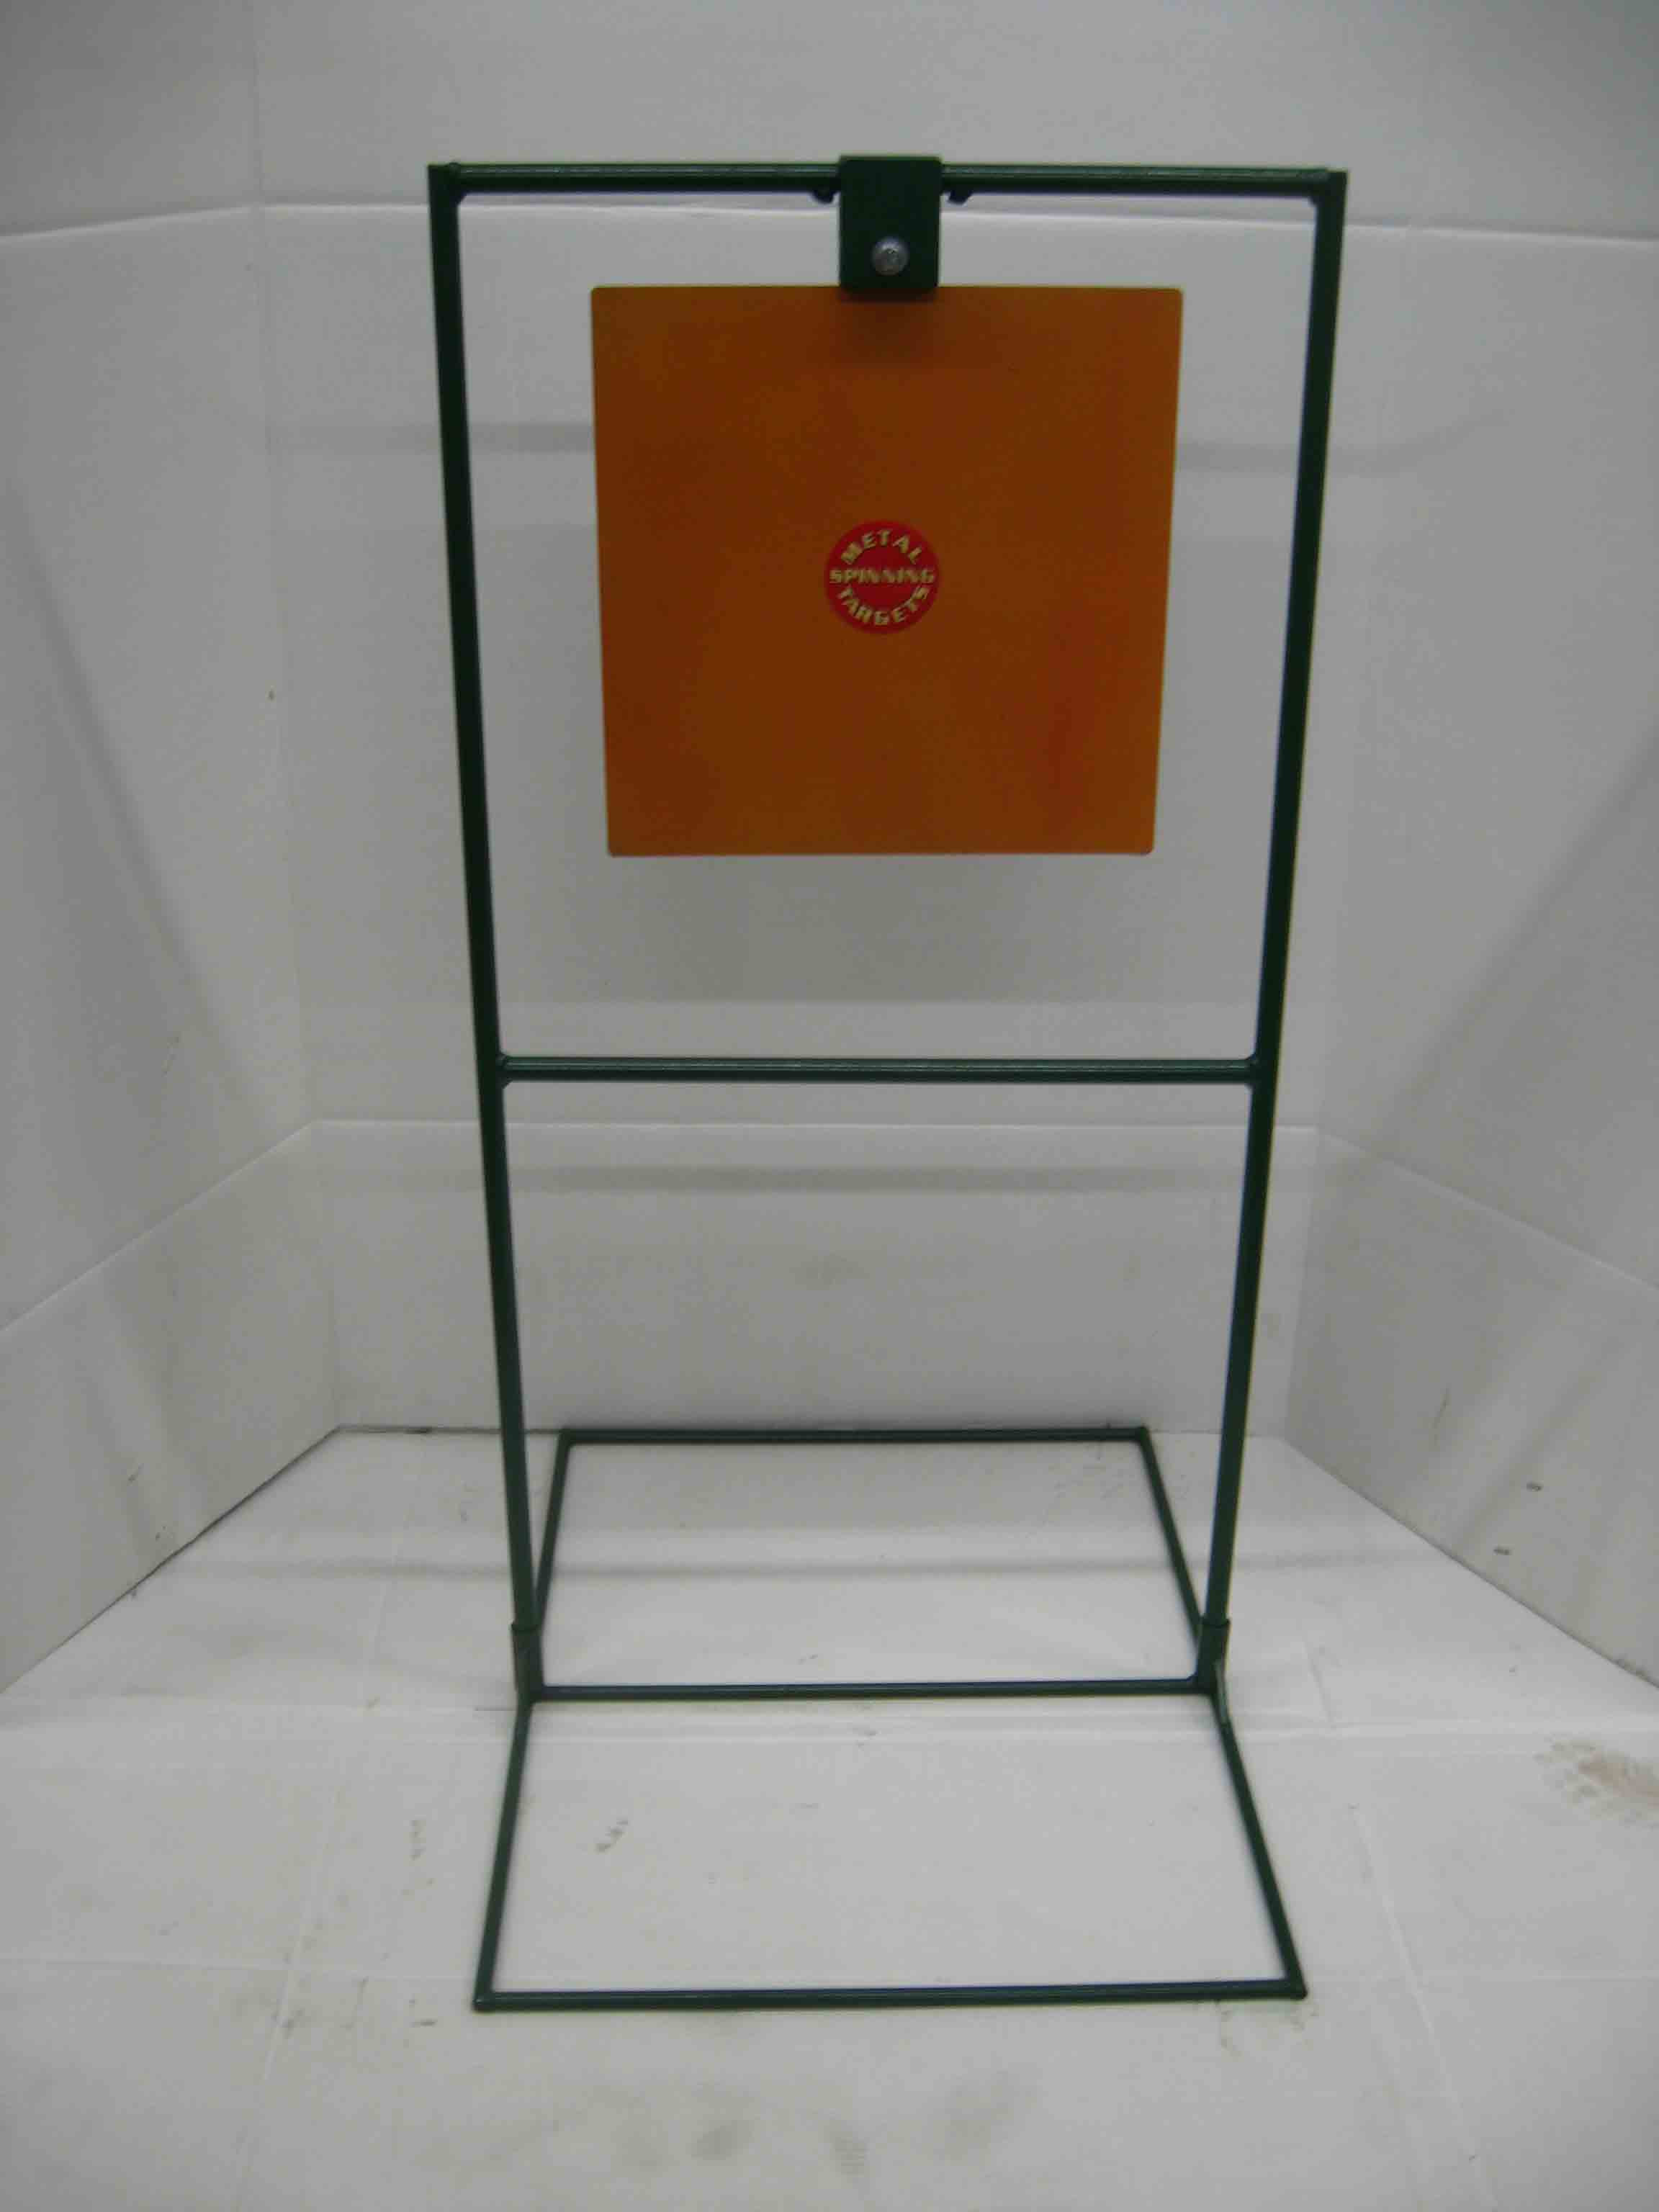 15" Square Steel Shooting Target - Rifle Target Stands With Base